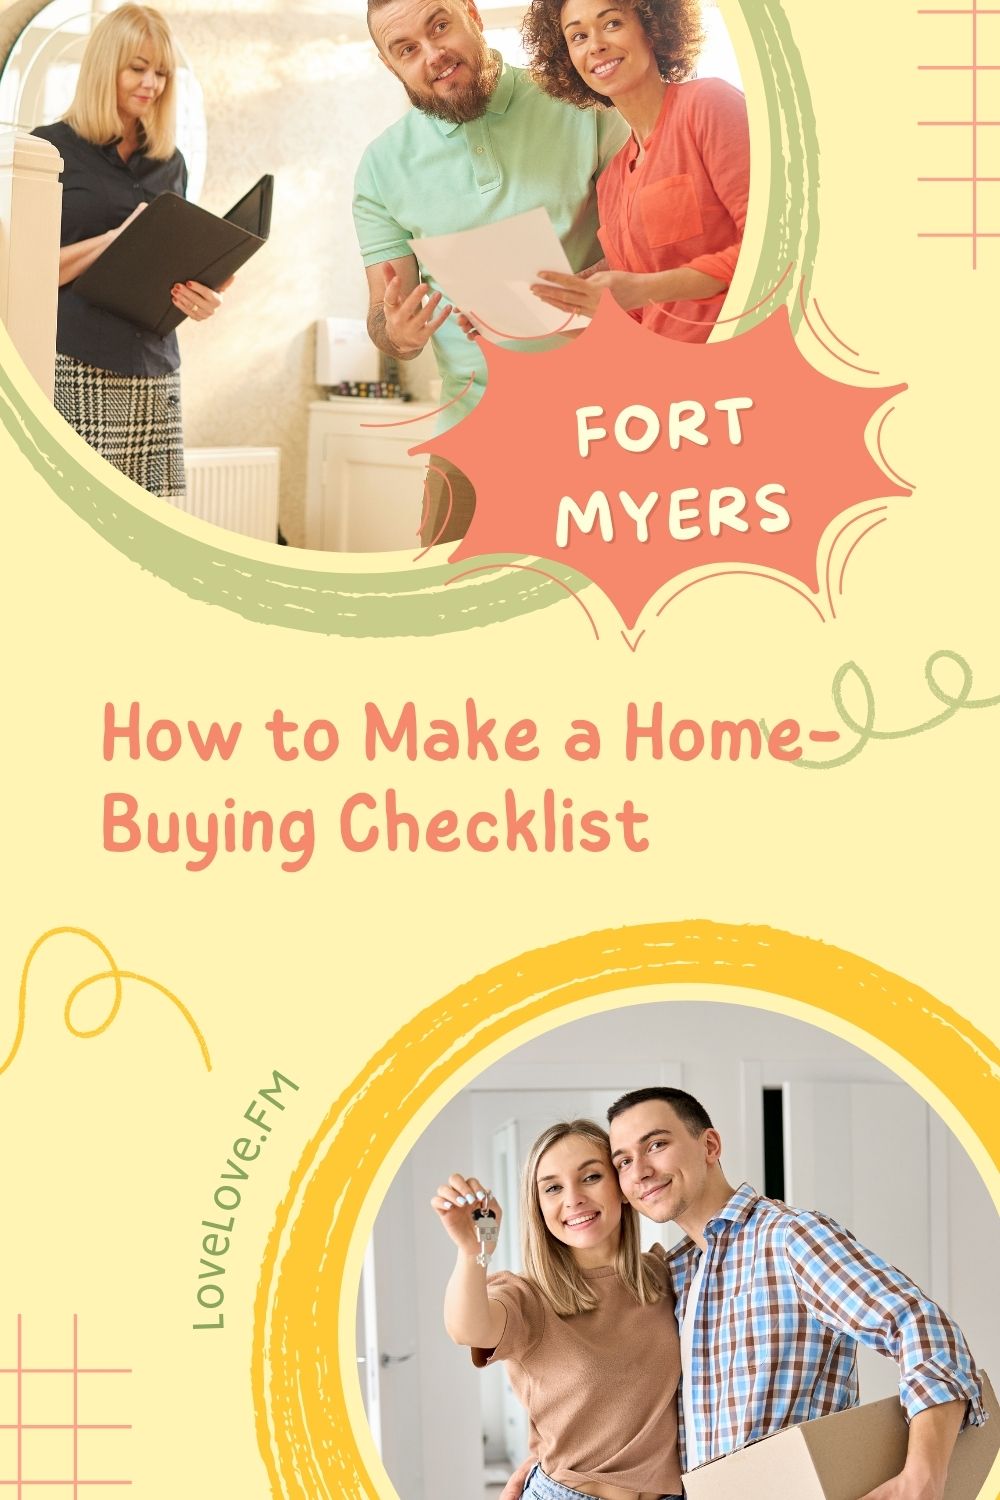 Home buyers checklist for Fort Myers